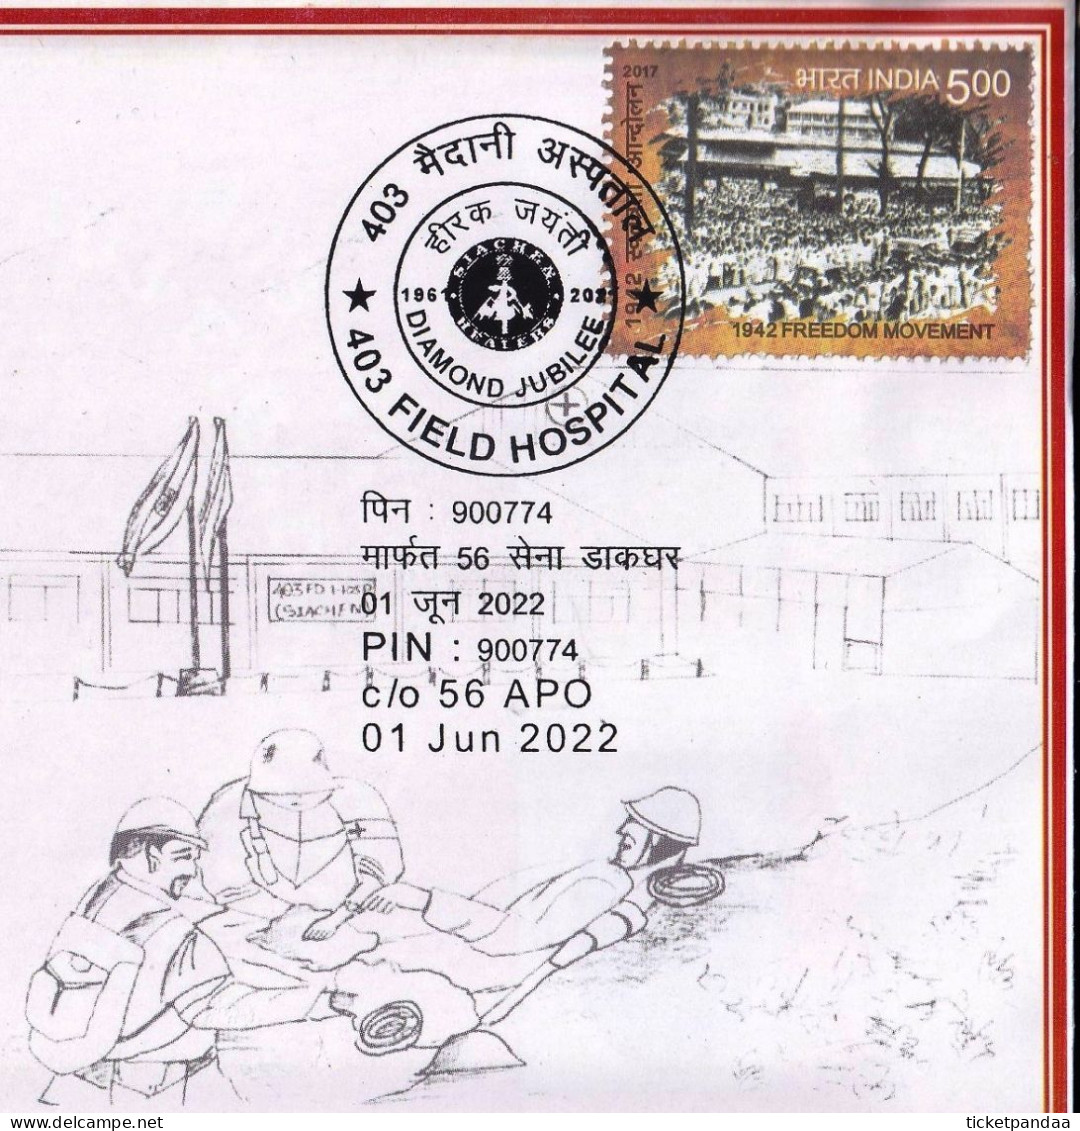 HEALTH- FIELD HOSPITALS AT SIACHEN GLACIER MOUNTAIN RANGE - PICTORIAL POSTMARK- SPECIAL COVER-INDIA-BX4-31 - Erste Hilfe